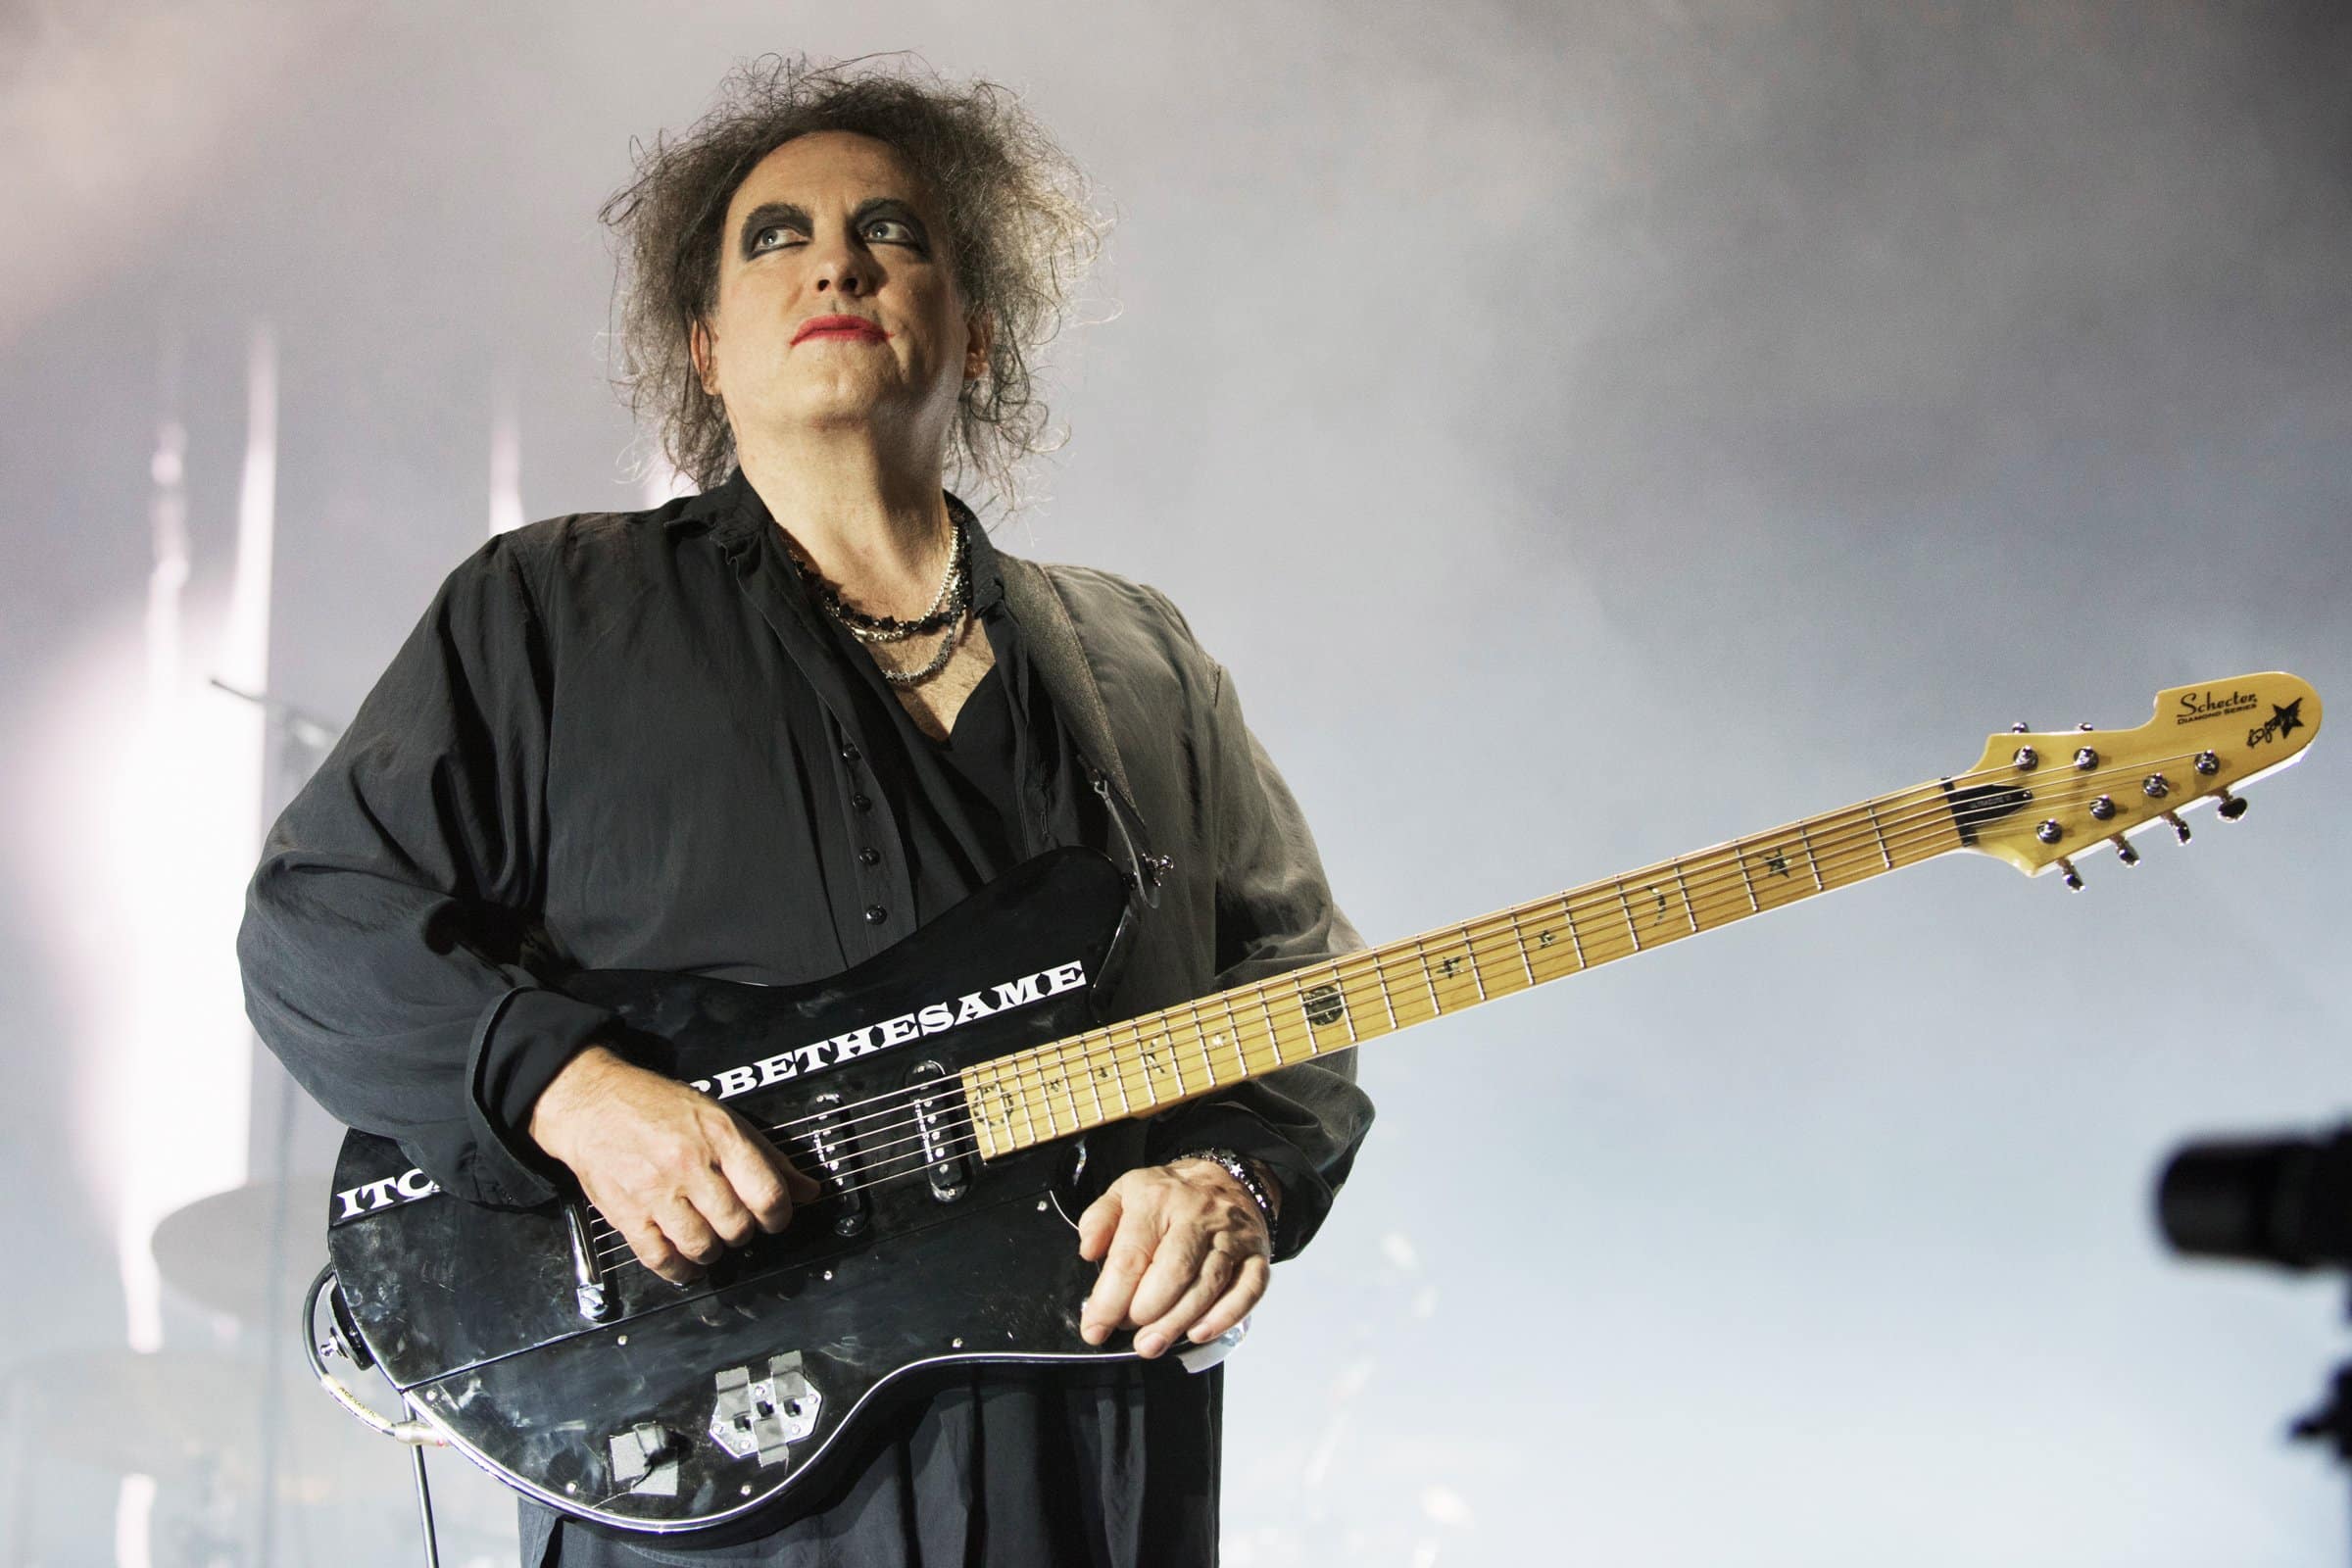 Robert Smith (Vocalist of The Cure)